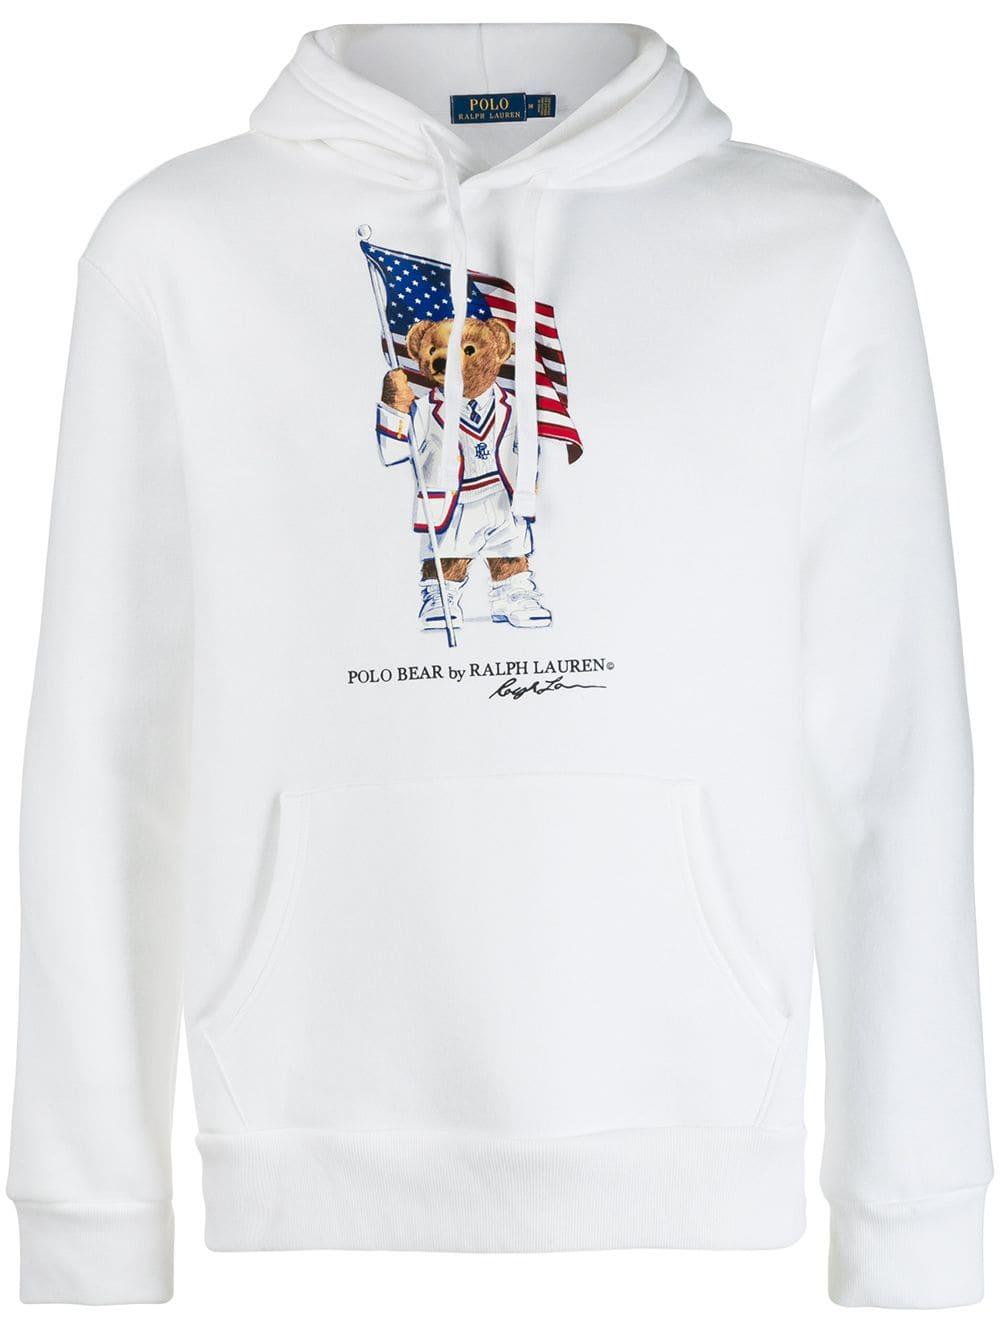 Polo Ralph Lauren Cotton Bear And Flag Print Hoodie in White for Men - Lyst